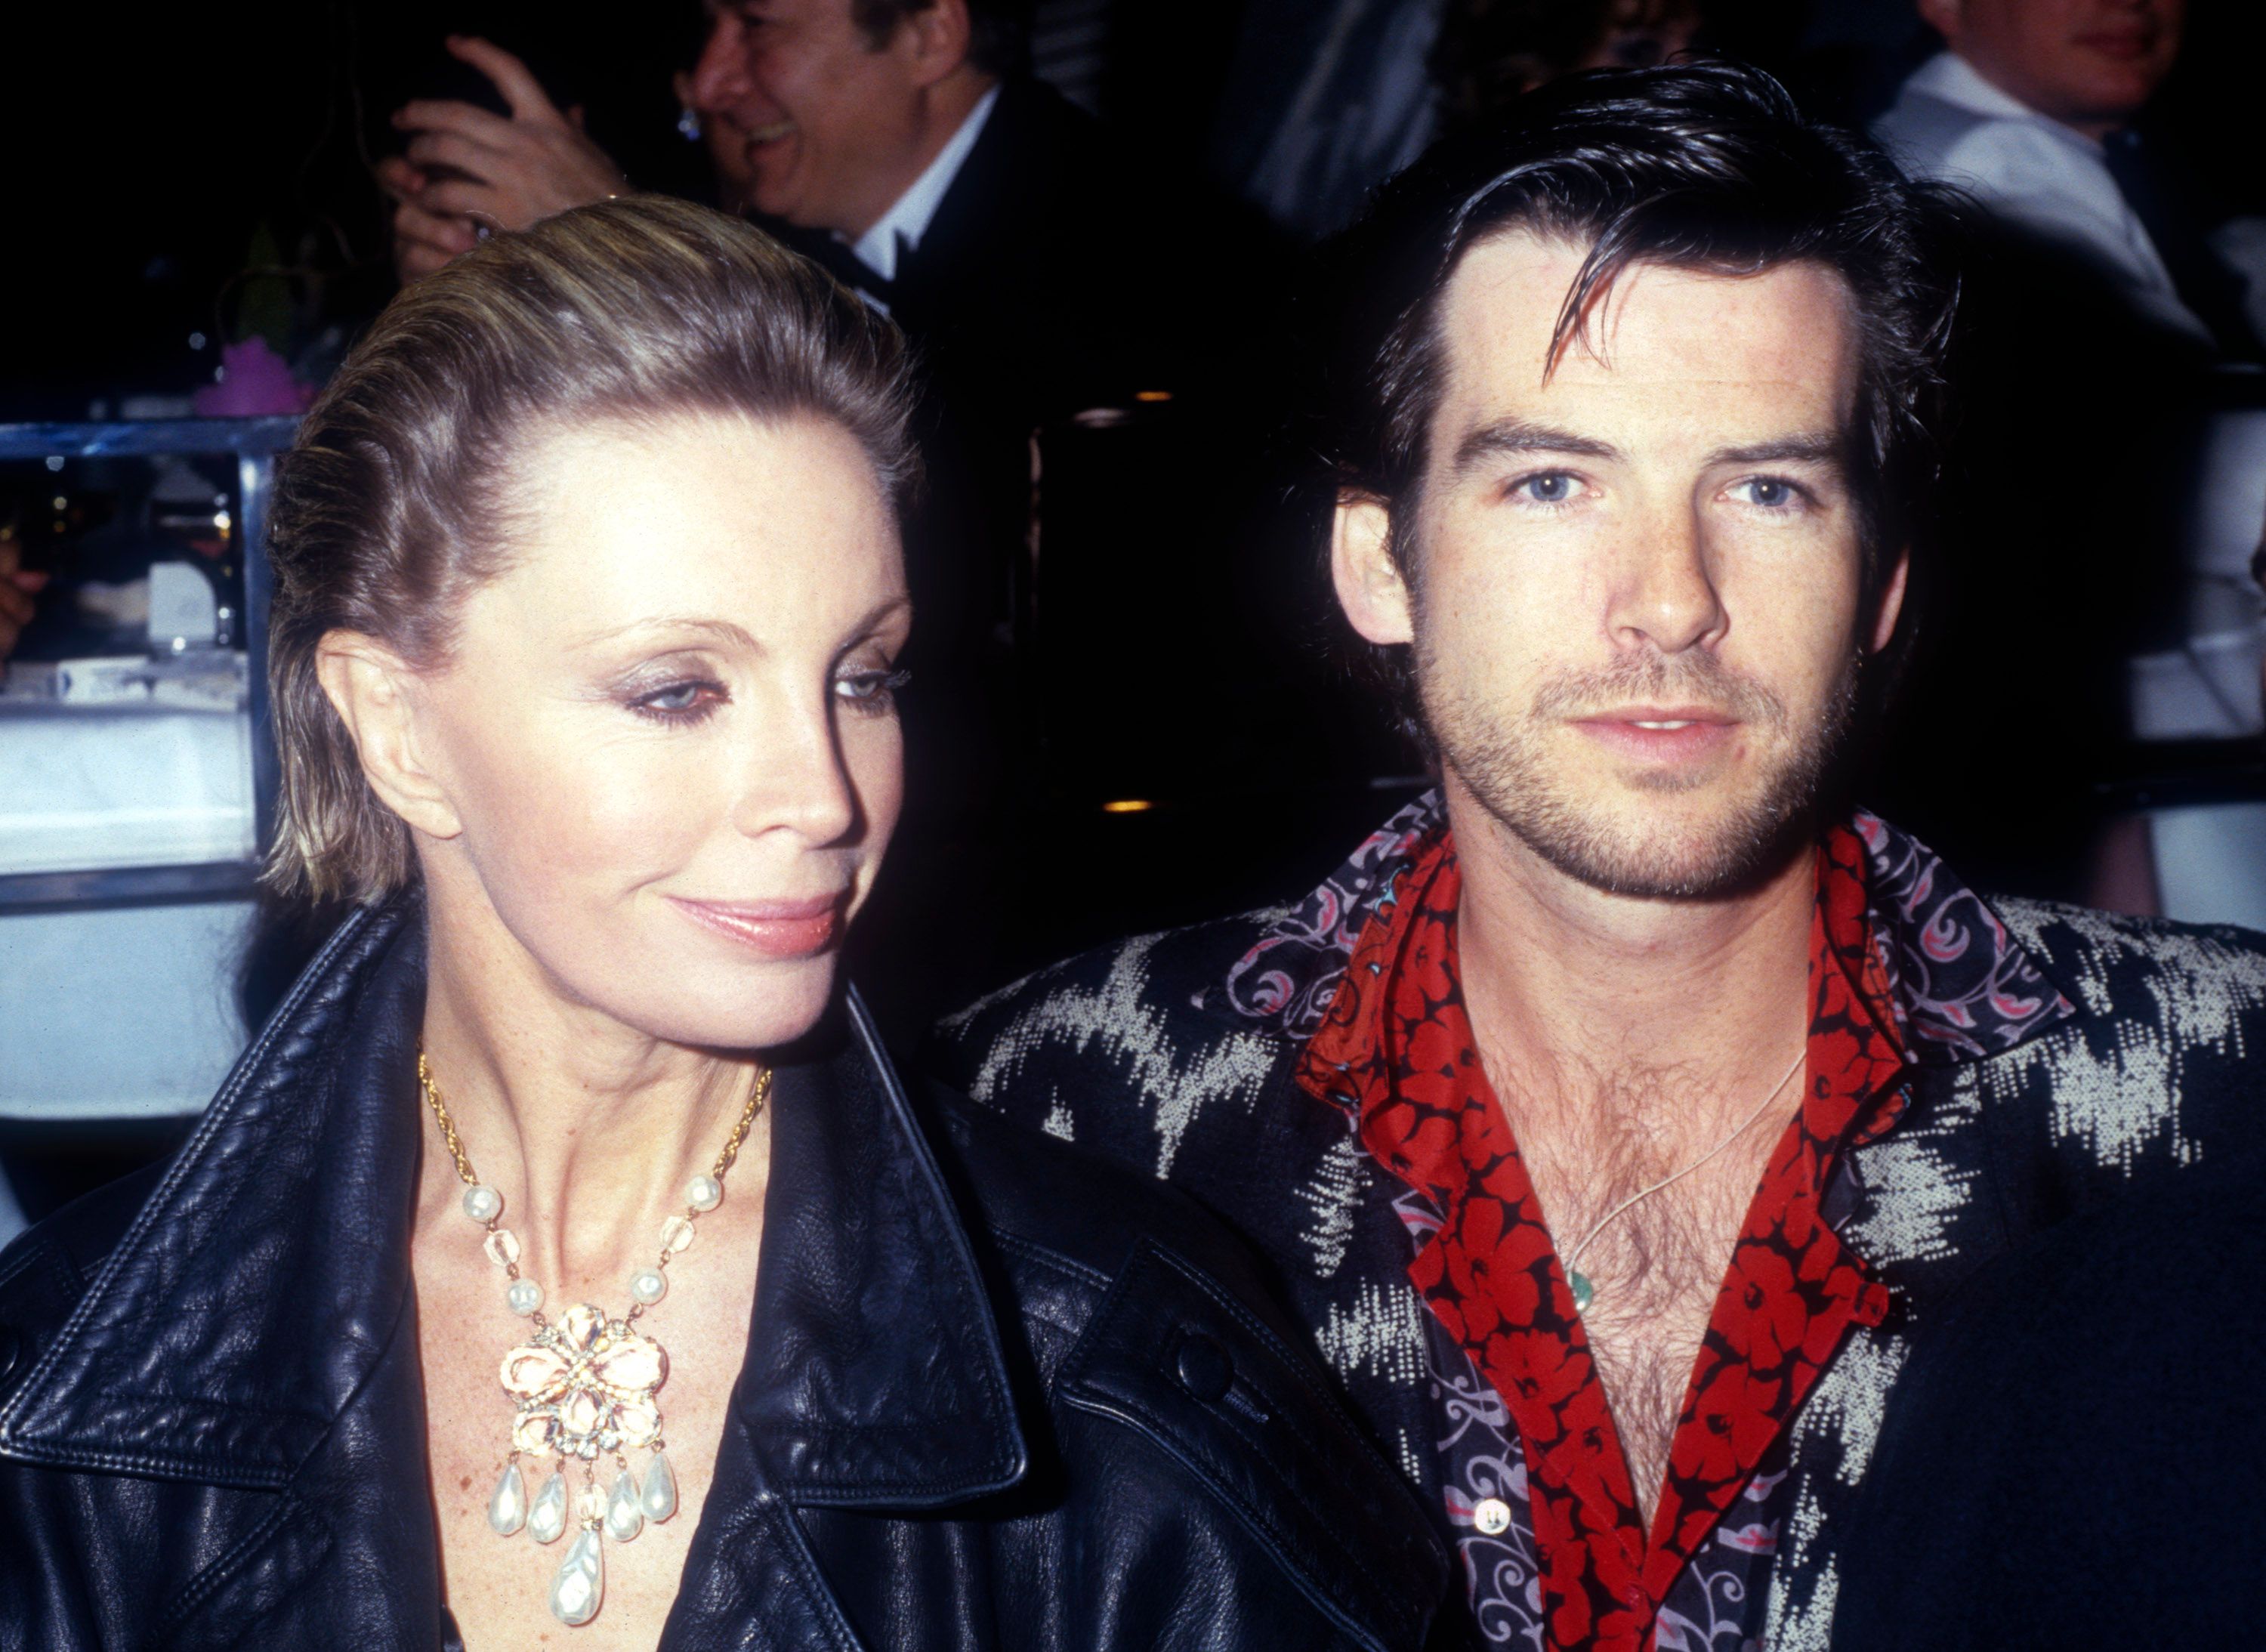 Pierce Brosnan and his now-late wife Cassandra Harris at the opening night party at Stringfellow's in 1986 in New York City | Photo: Getty Images